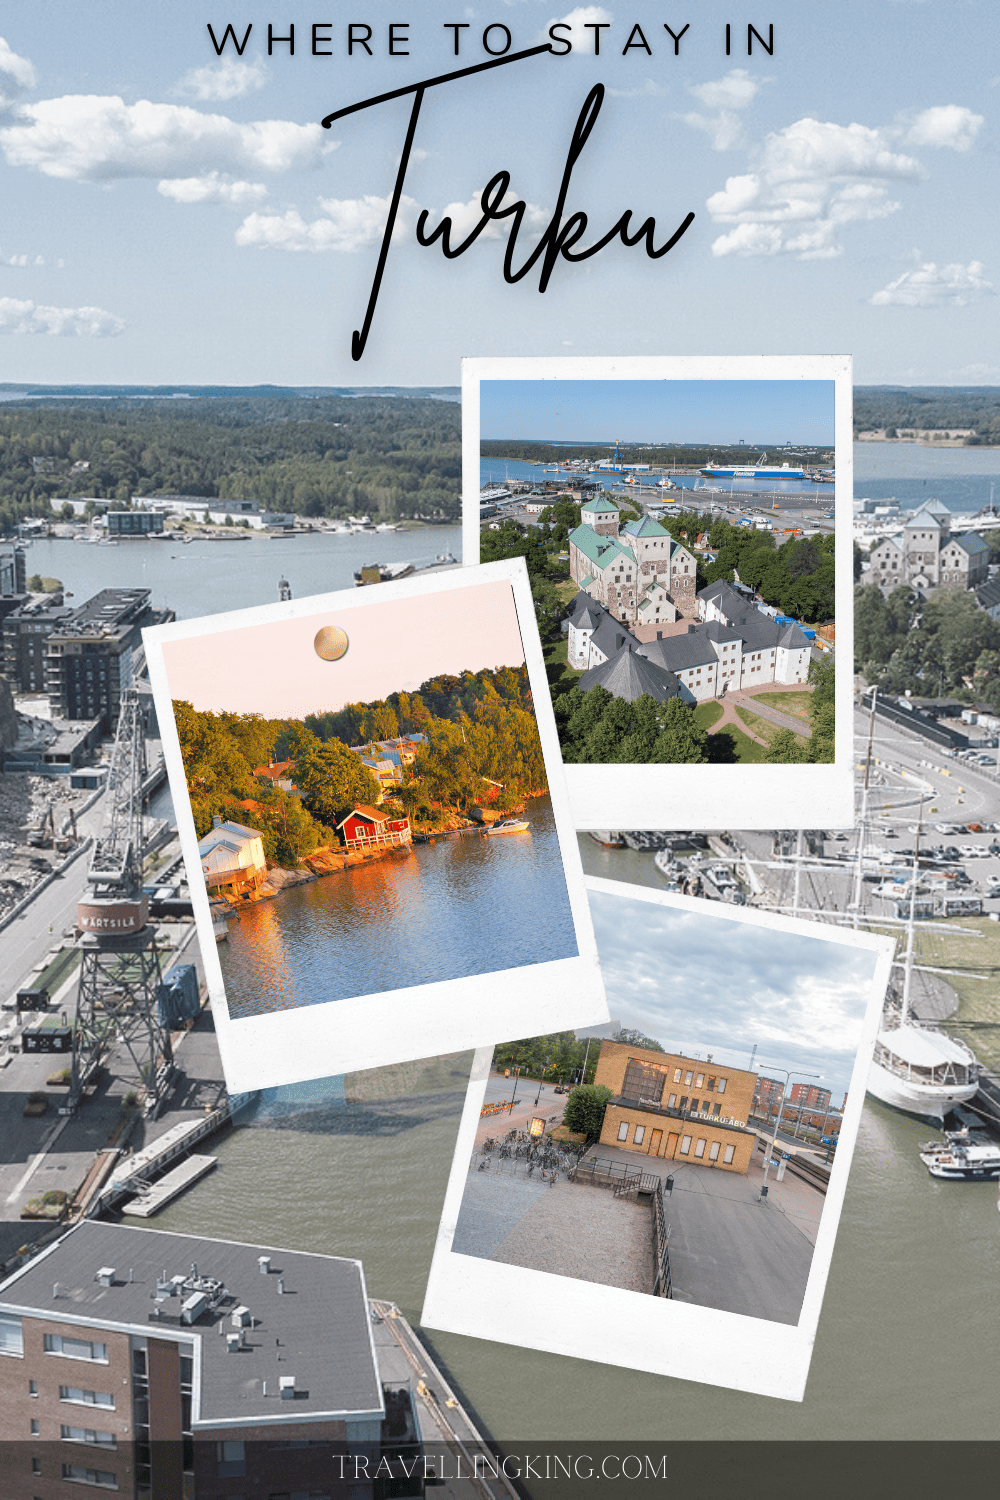 Where to stay in Turku